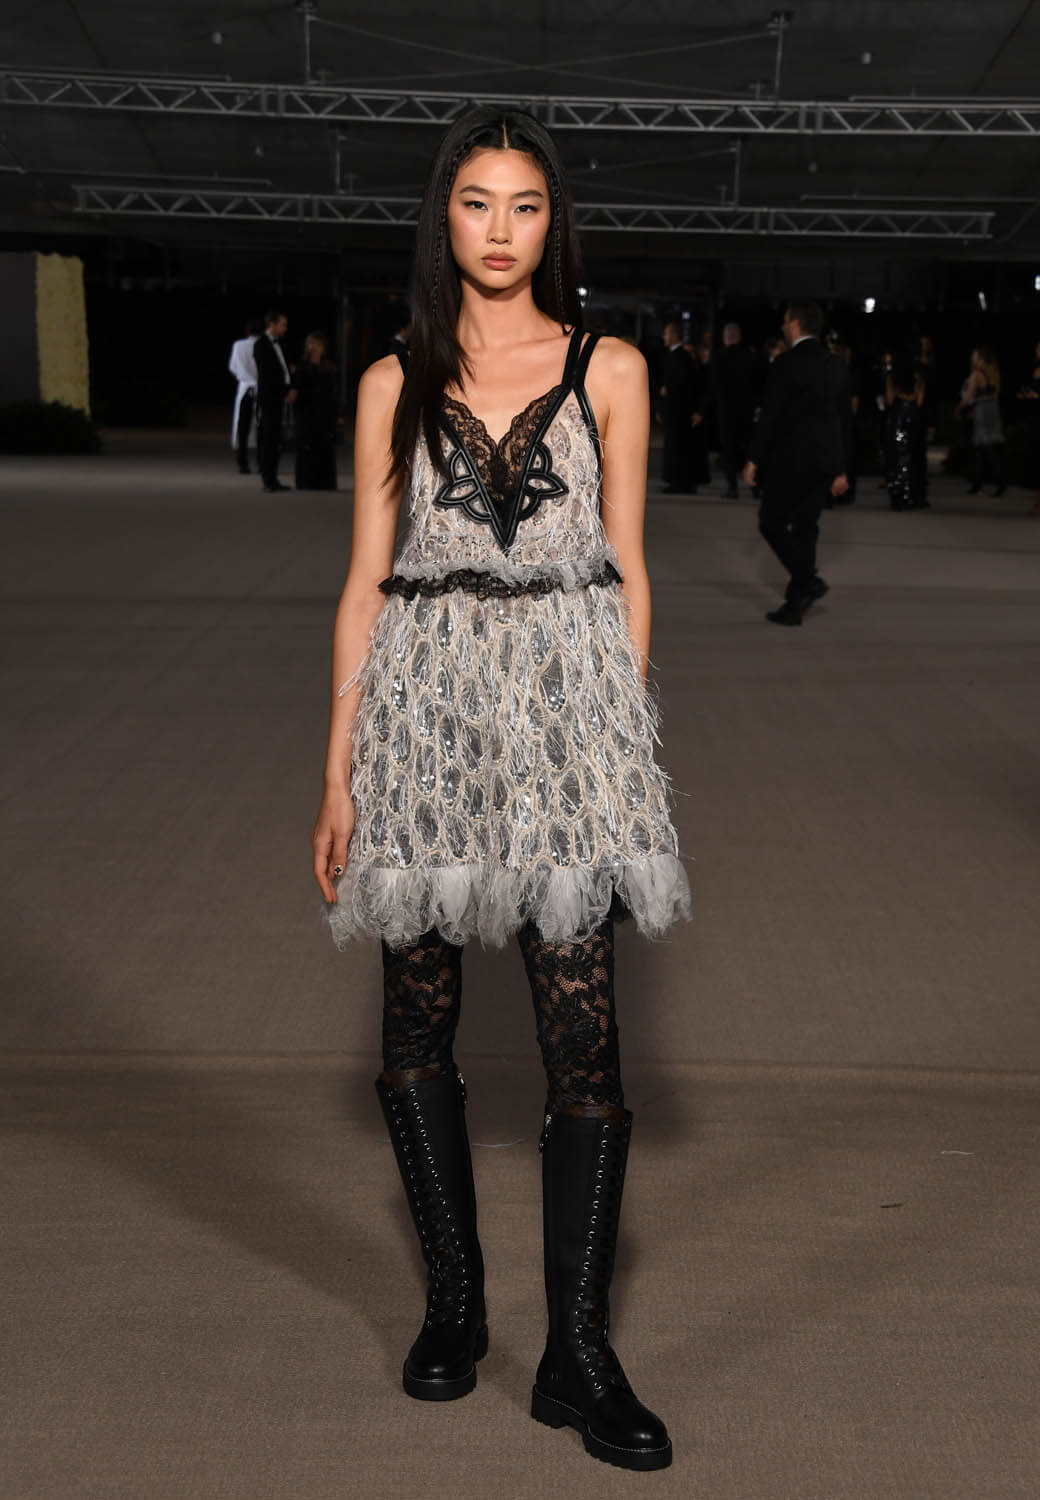 Sequins, leather and more feathers, and Louis Vuitton at the